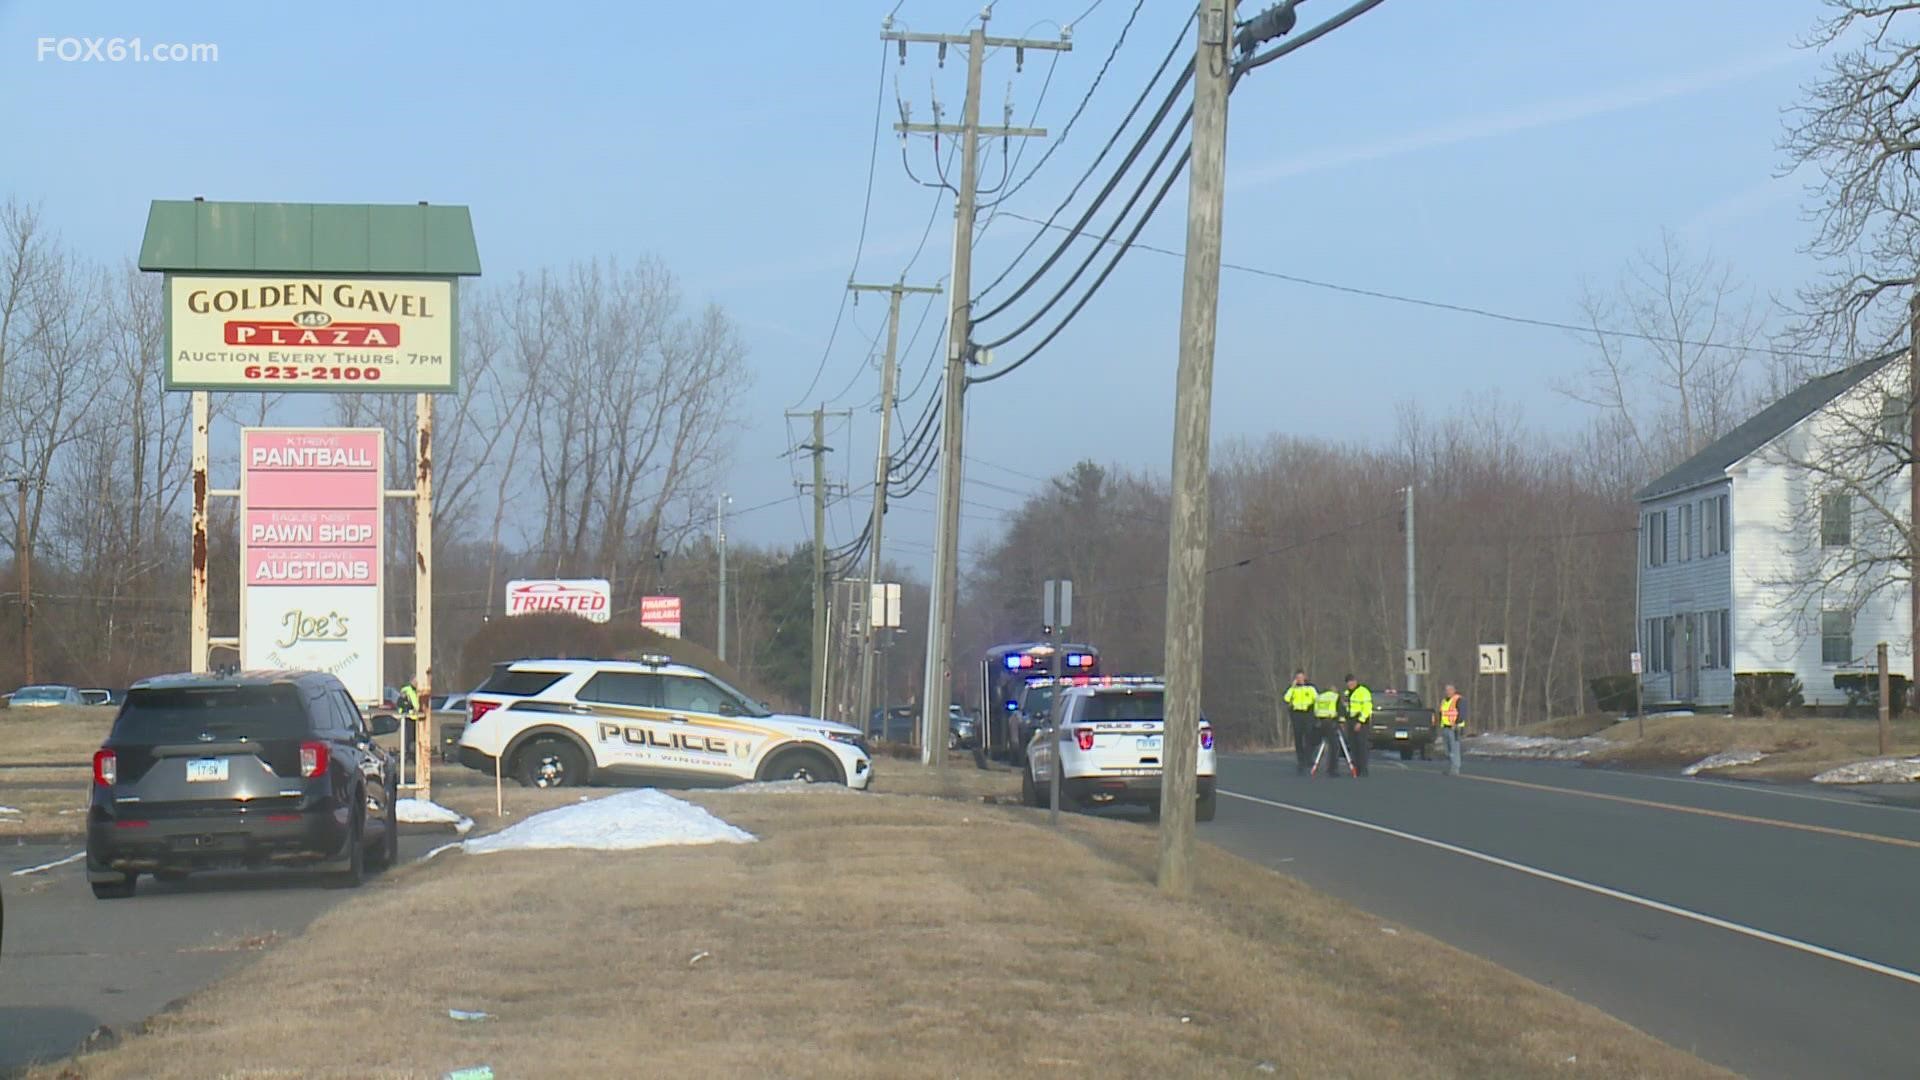 A teenager is fighting for her life and a person is in custody after a pedestrian was struck by a vehicle in East Windsor Sunday afternoon, according to police.